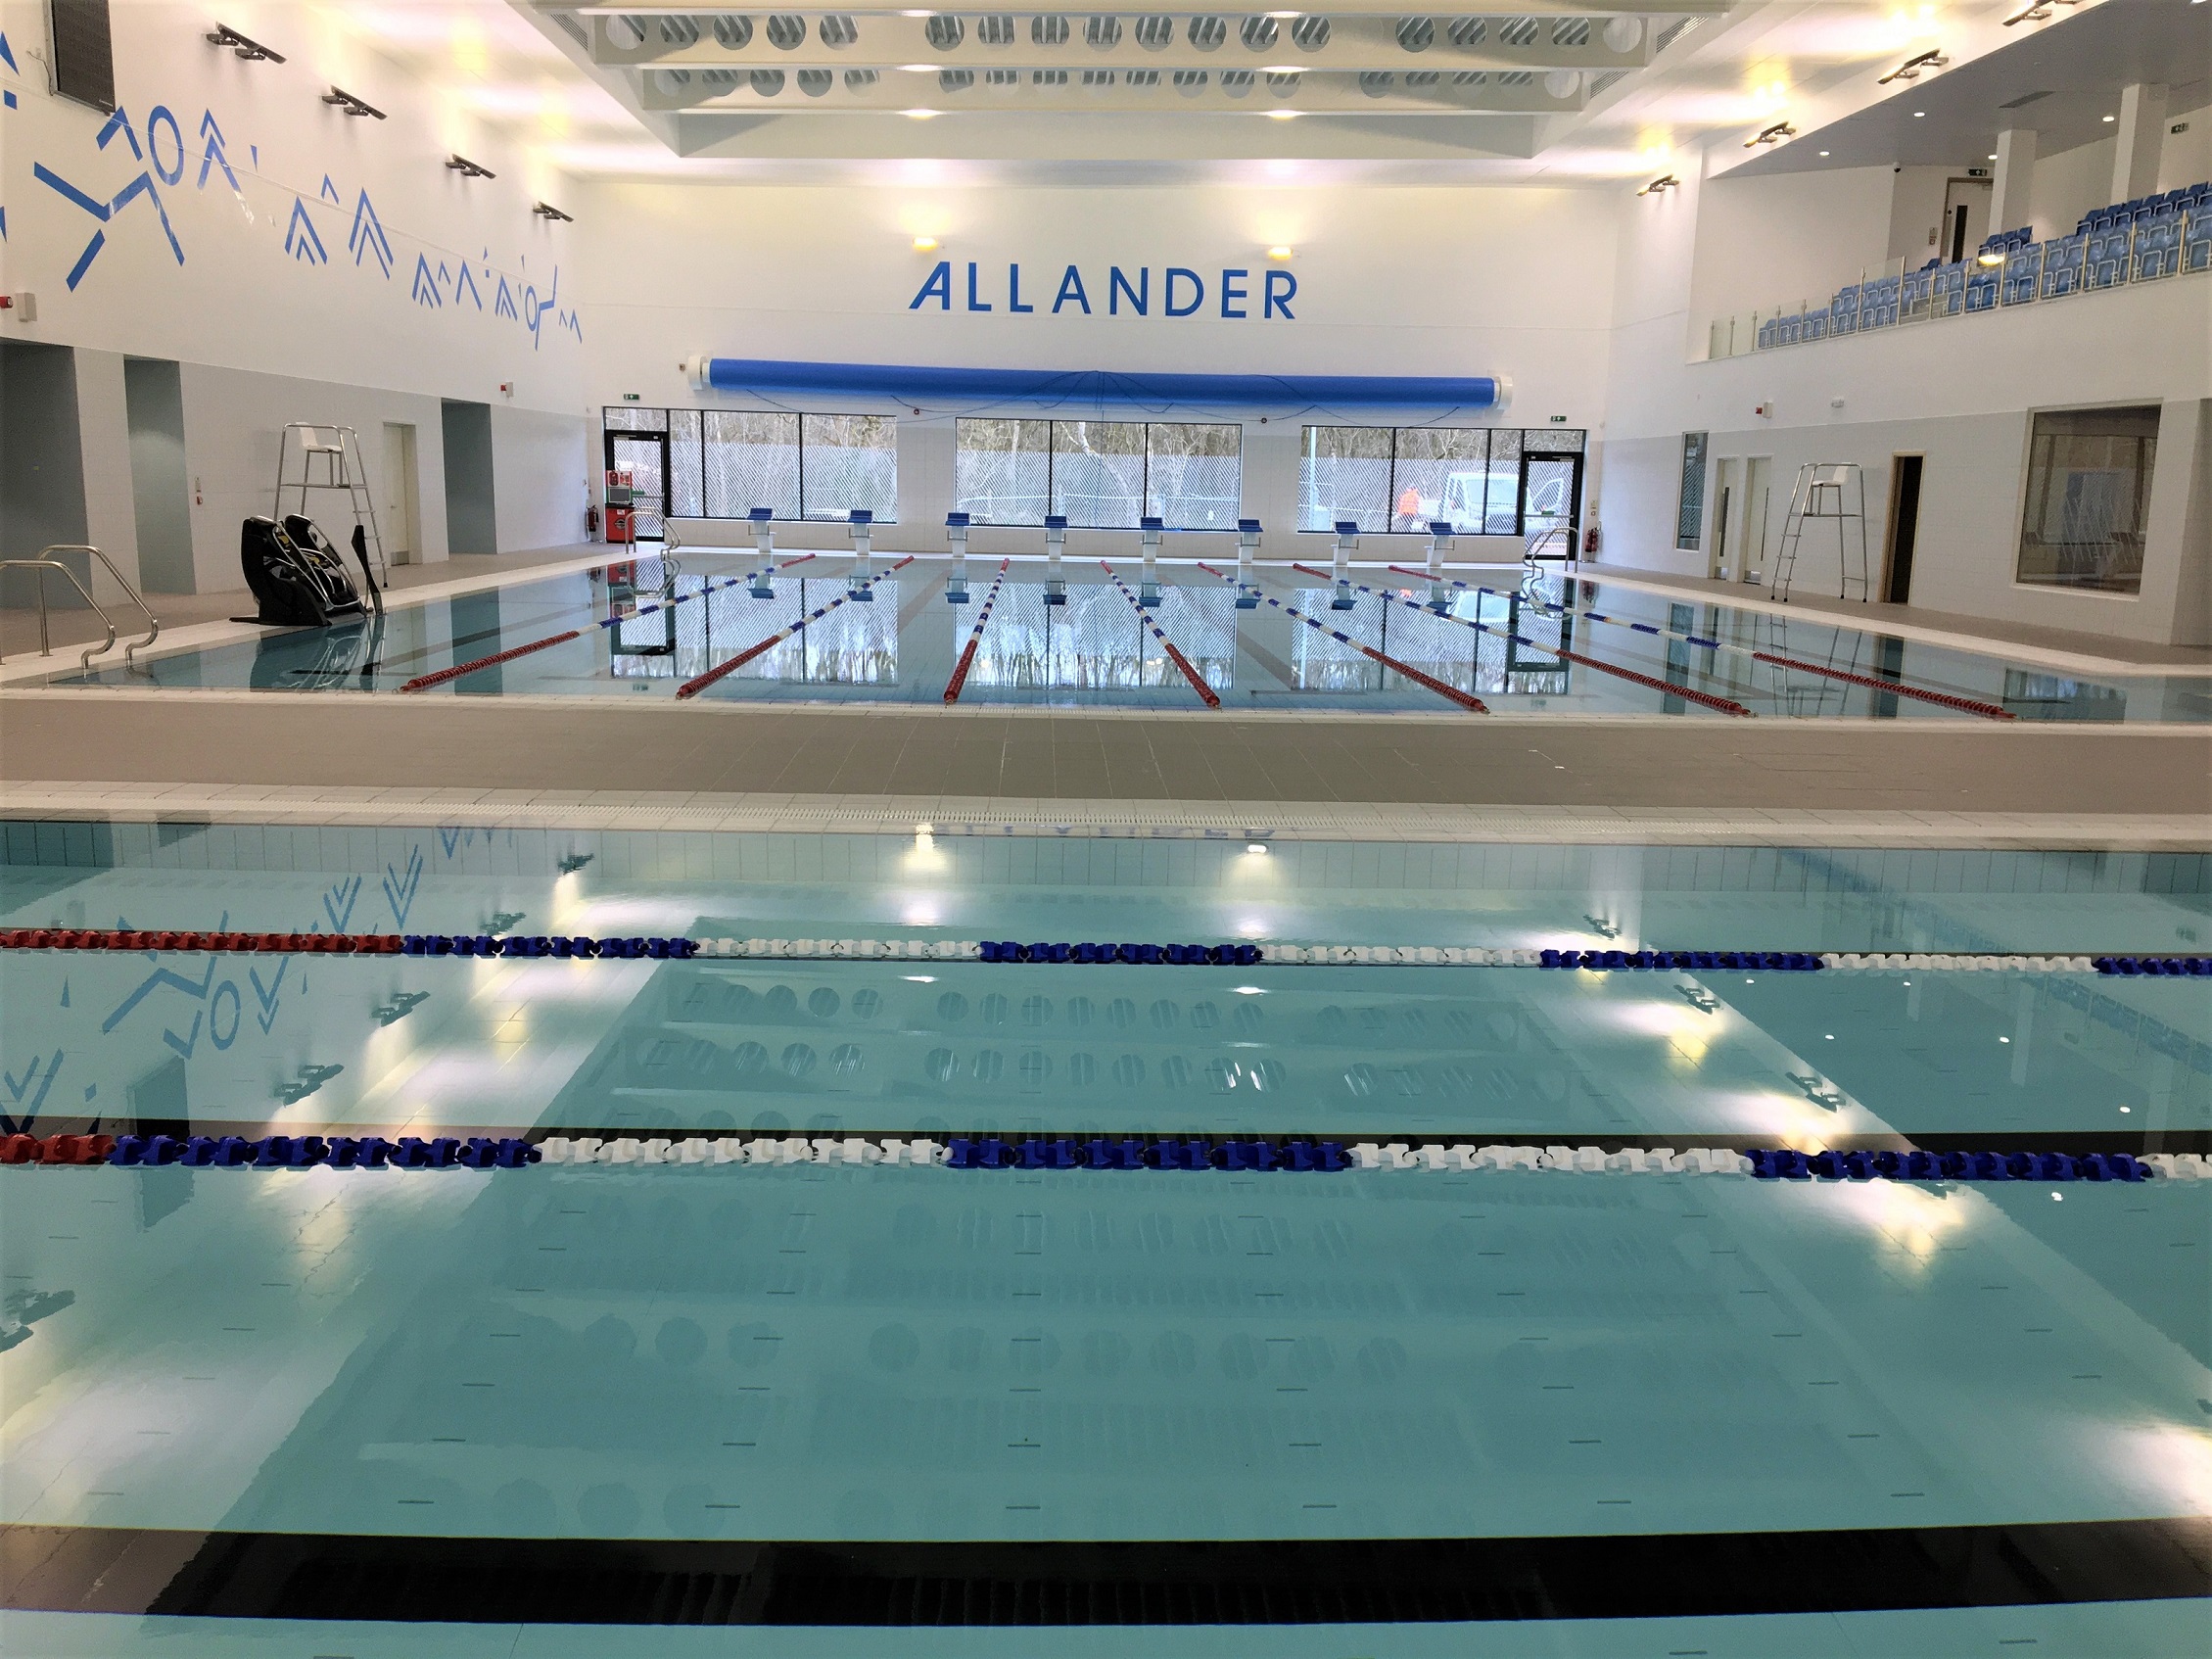 Works near completion on first phase of the new Allander Leisure Centre